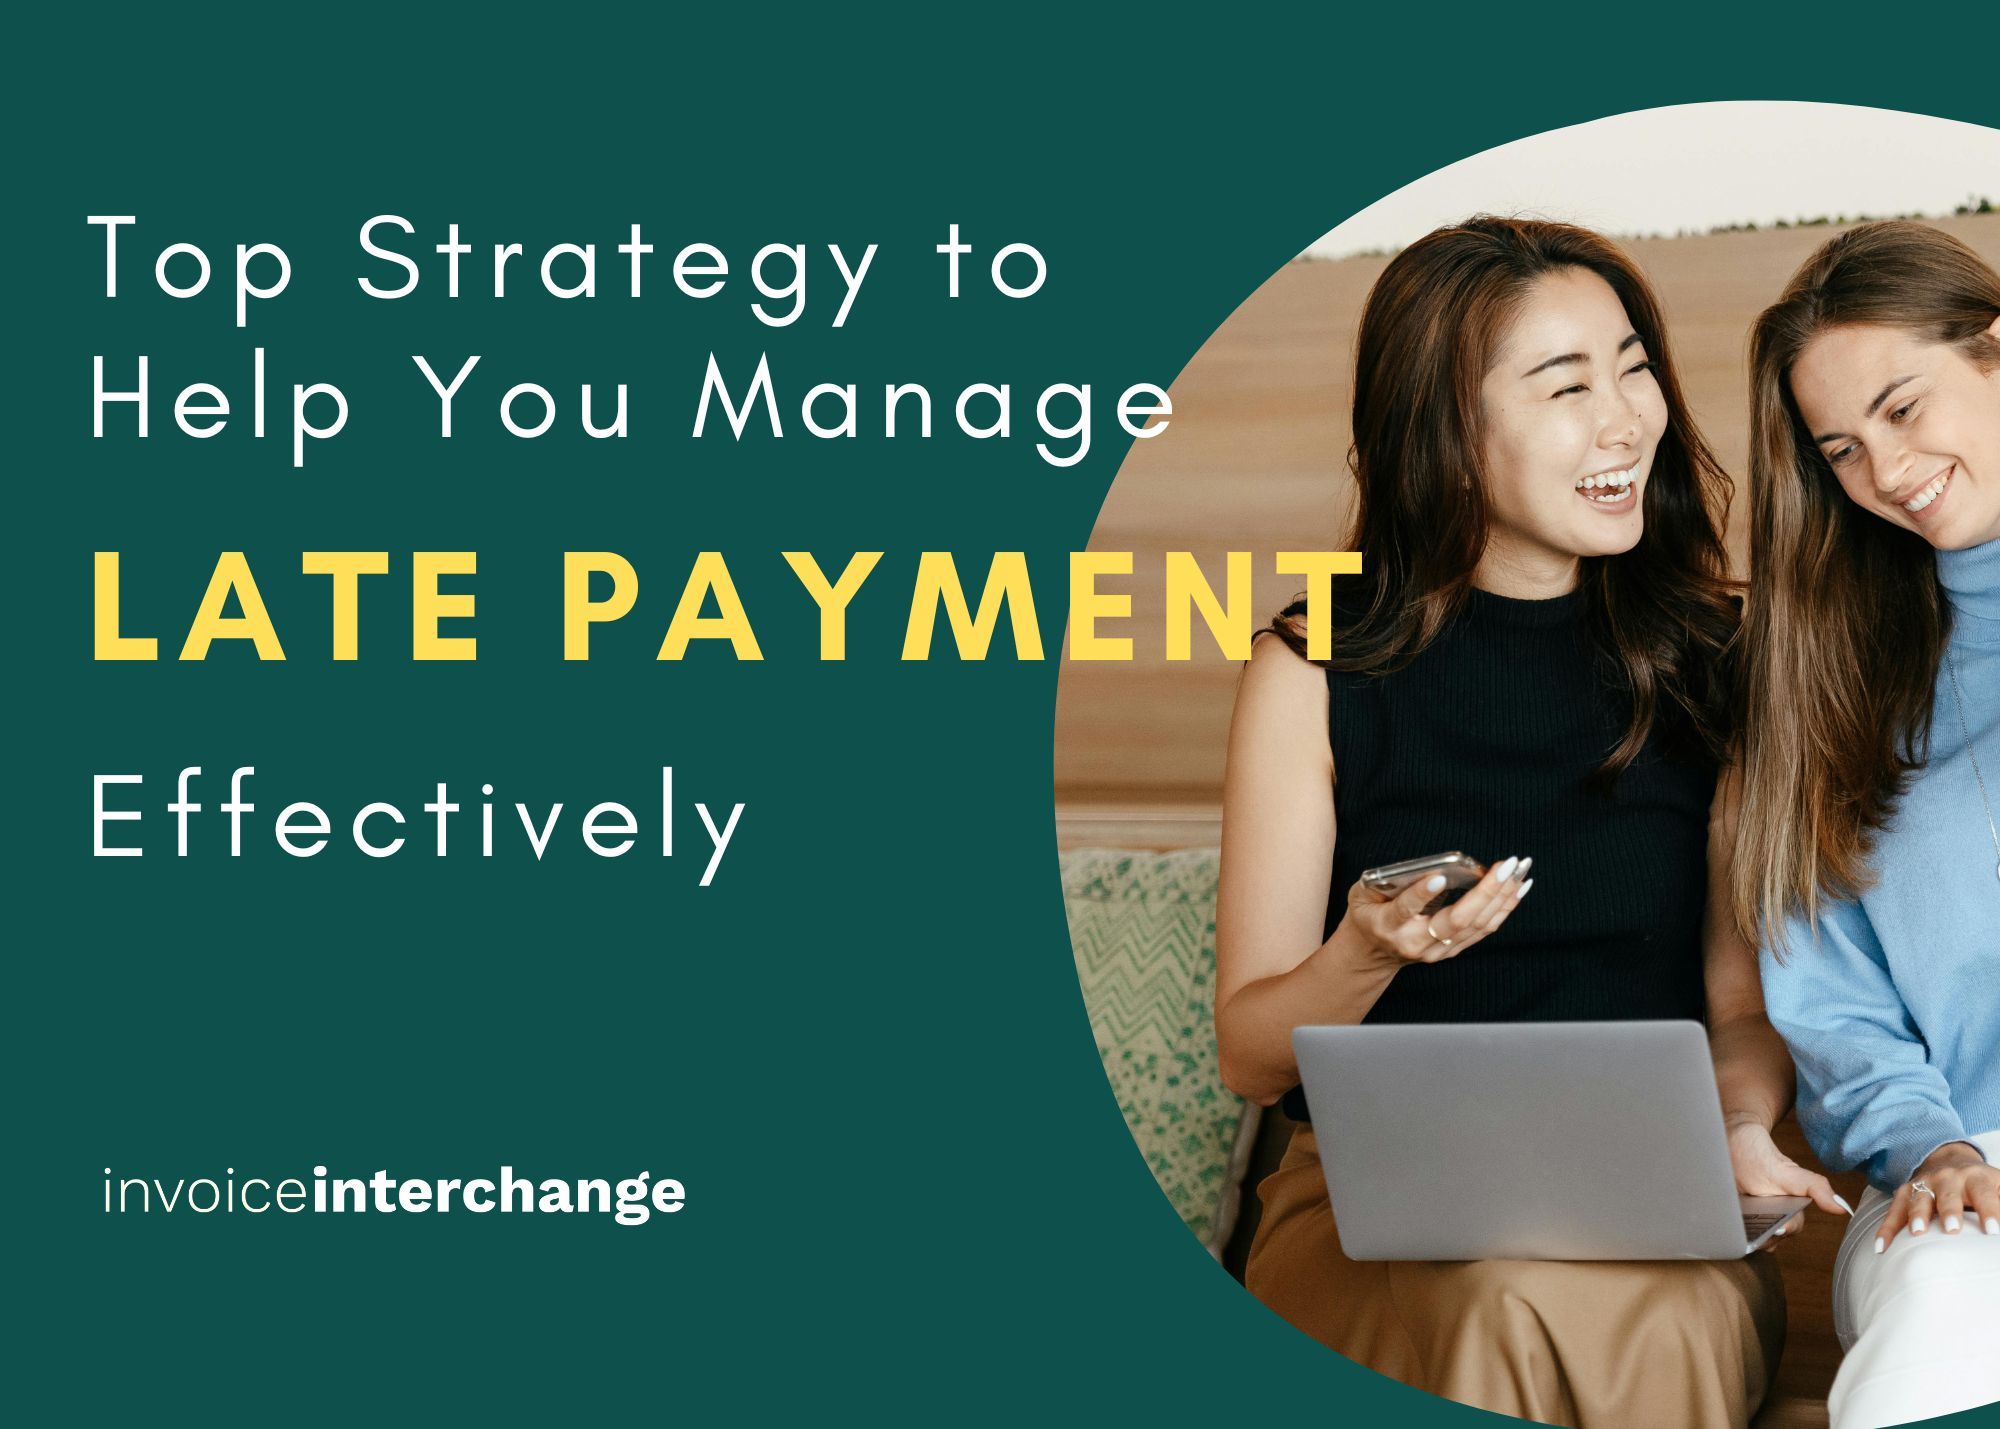 Top strategy to help you manage late payment effectively